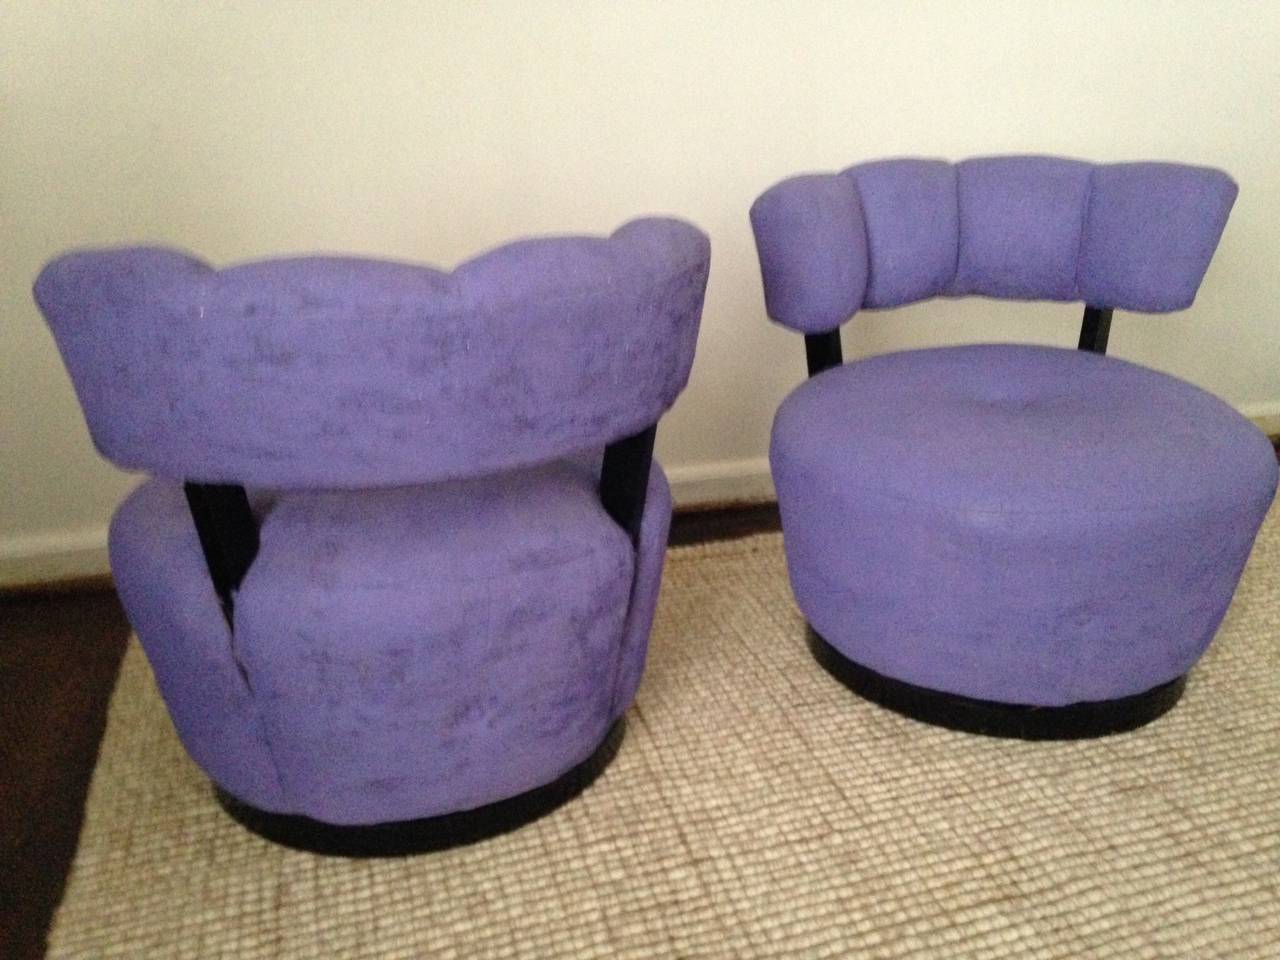 This pair of lacquered wood and suede swivel
Chairs are designed by Gilbert Rohde circa 1940's .They are a great design and recommend reupholstery.